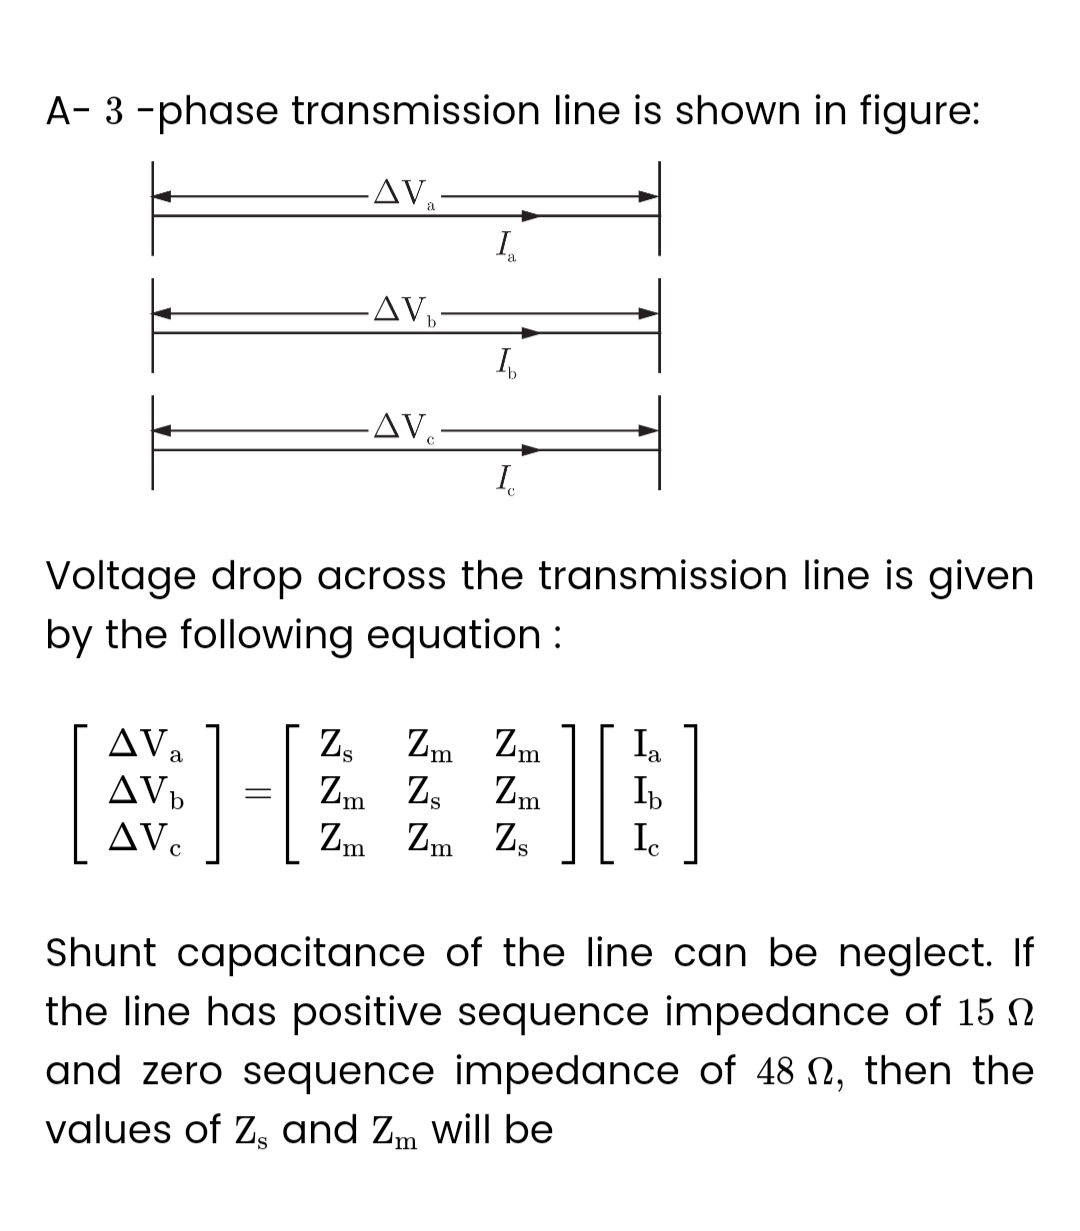 A-3-phase transmission line is shown in figure:
.AV:
ΔV,
AVb
AV
-AV₂-
=
-AV
I₁
a
Ib
Voltage drop across the transmission line is given
by the following equation :
I
Z₂ Zm Zm
Zm Zs Zm
Zm Zm Zs
][
Ia
Ib
Ic
Shunt capacitance of the line can be neglect. If
the line has positive sequence impedance of 15
and zero sequence impedance of 48 , then the
values of Z, and Zm will be
S